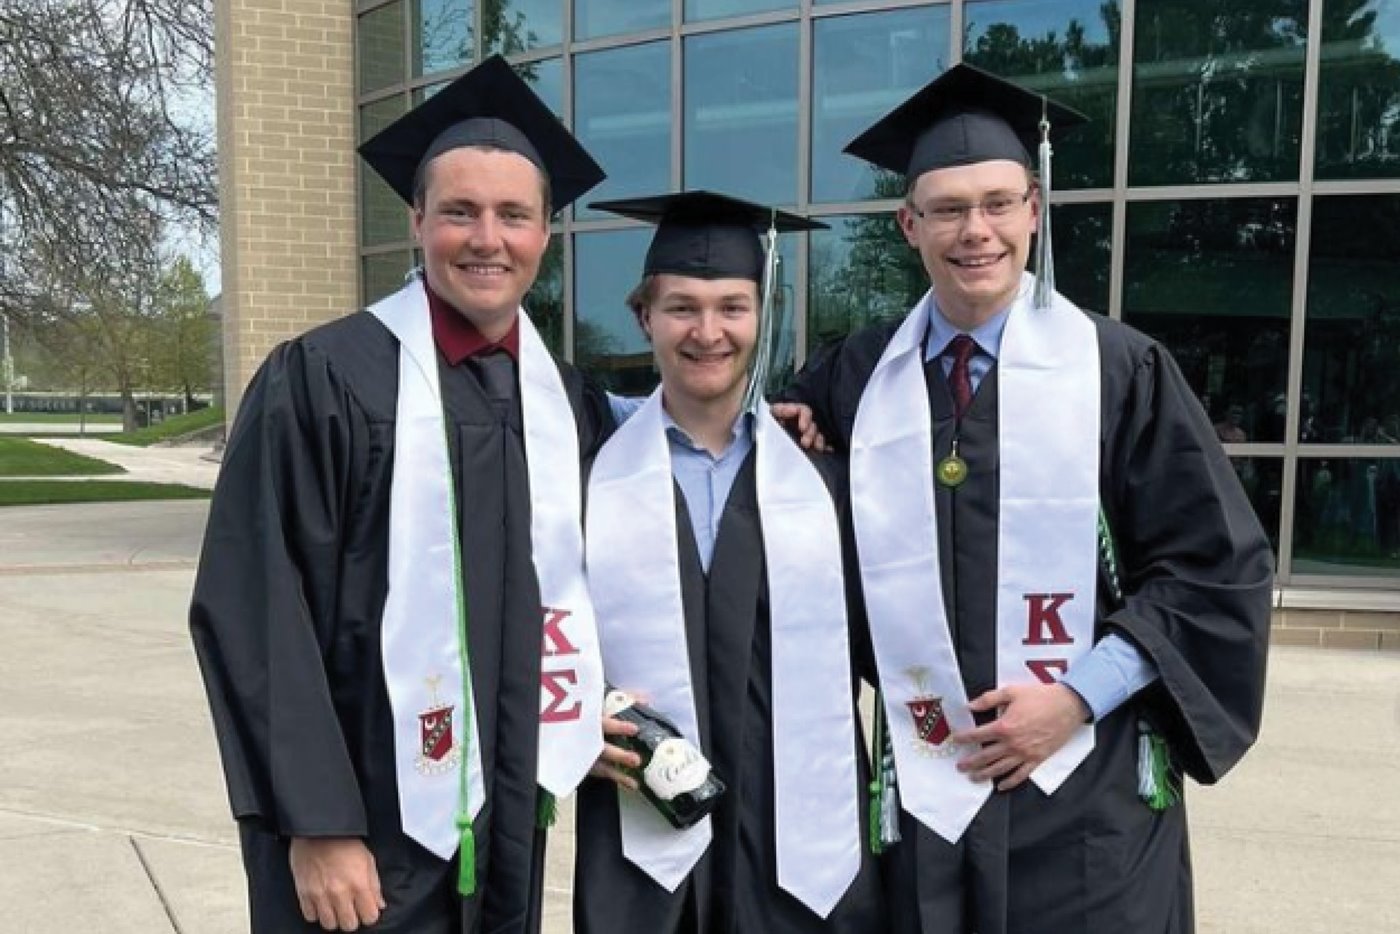 Kappa Sigma brothers pose in their caps, gowns and fraternity regalia at commencement